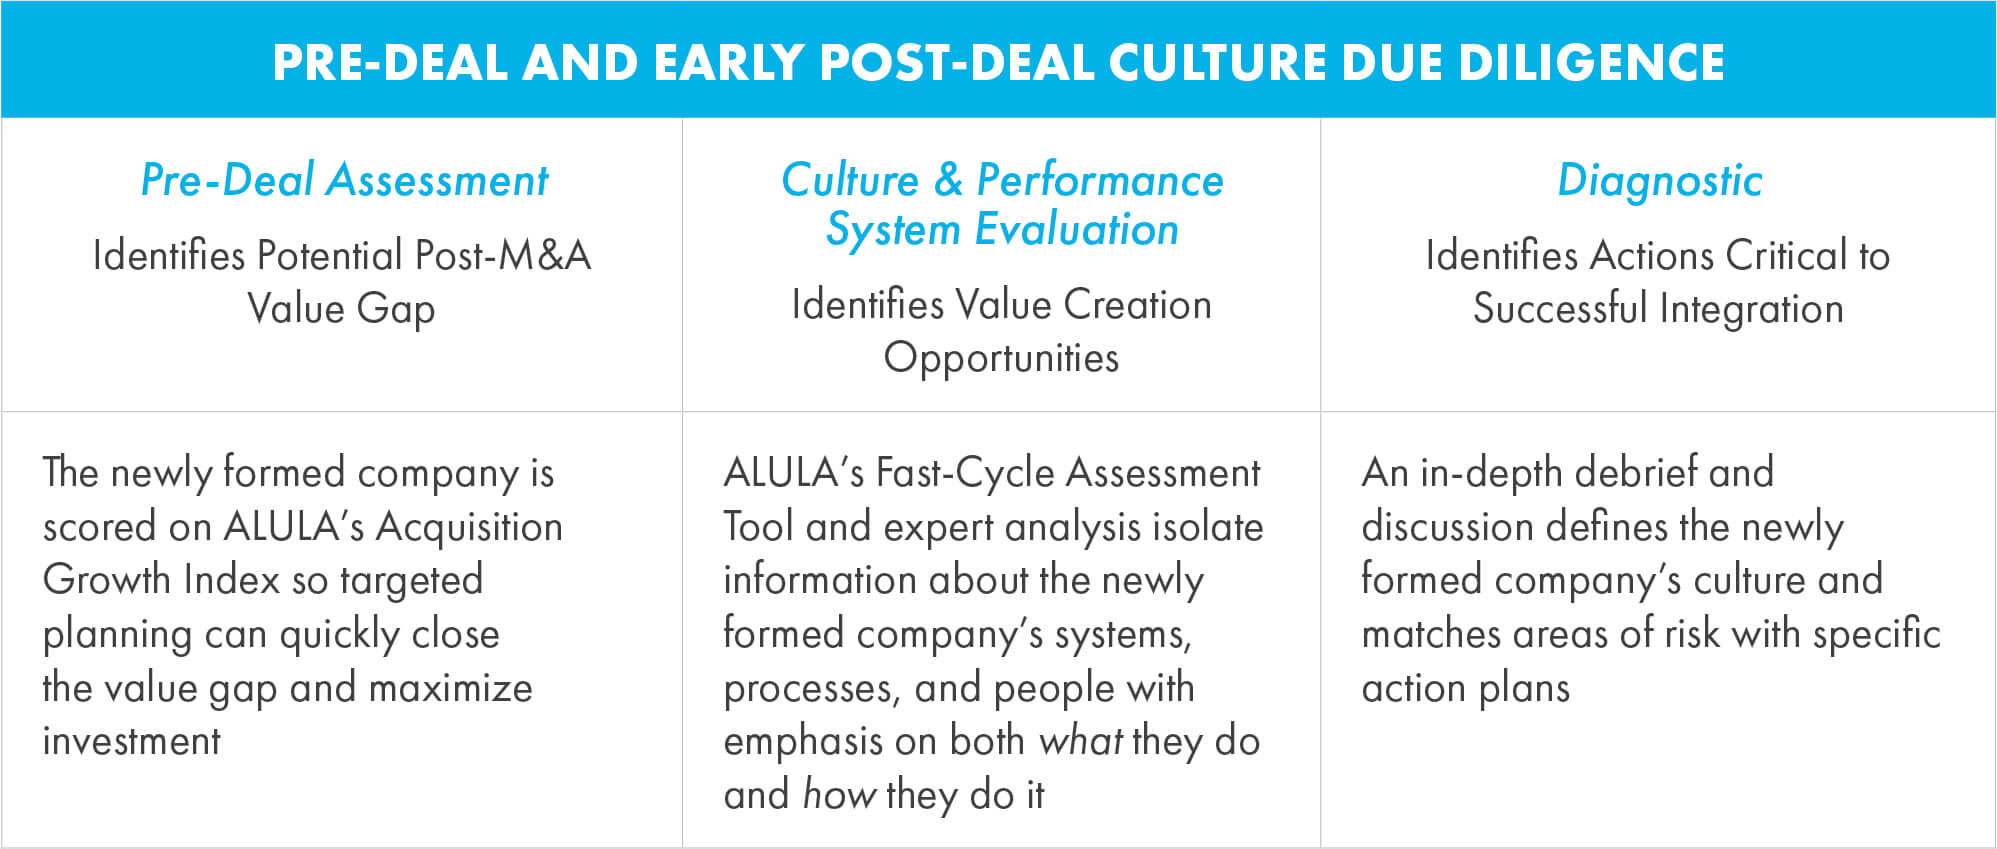 PRE-DEAL AND EARLY POST-DEAL Culture Due Diligence